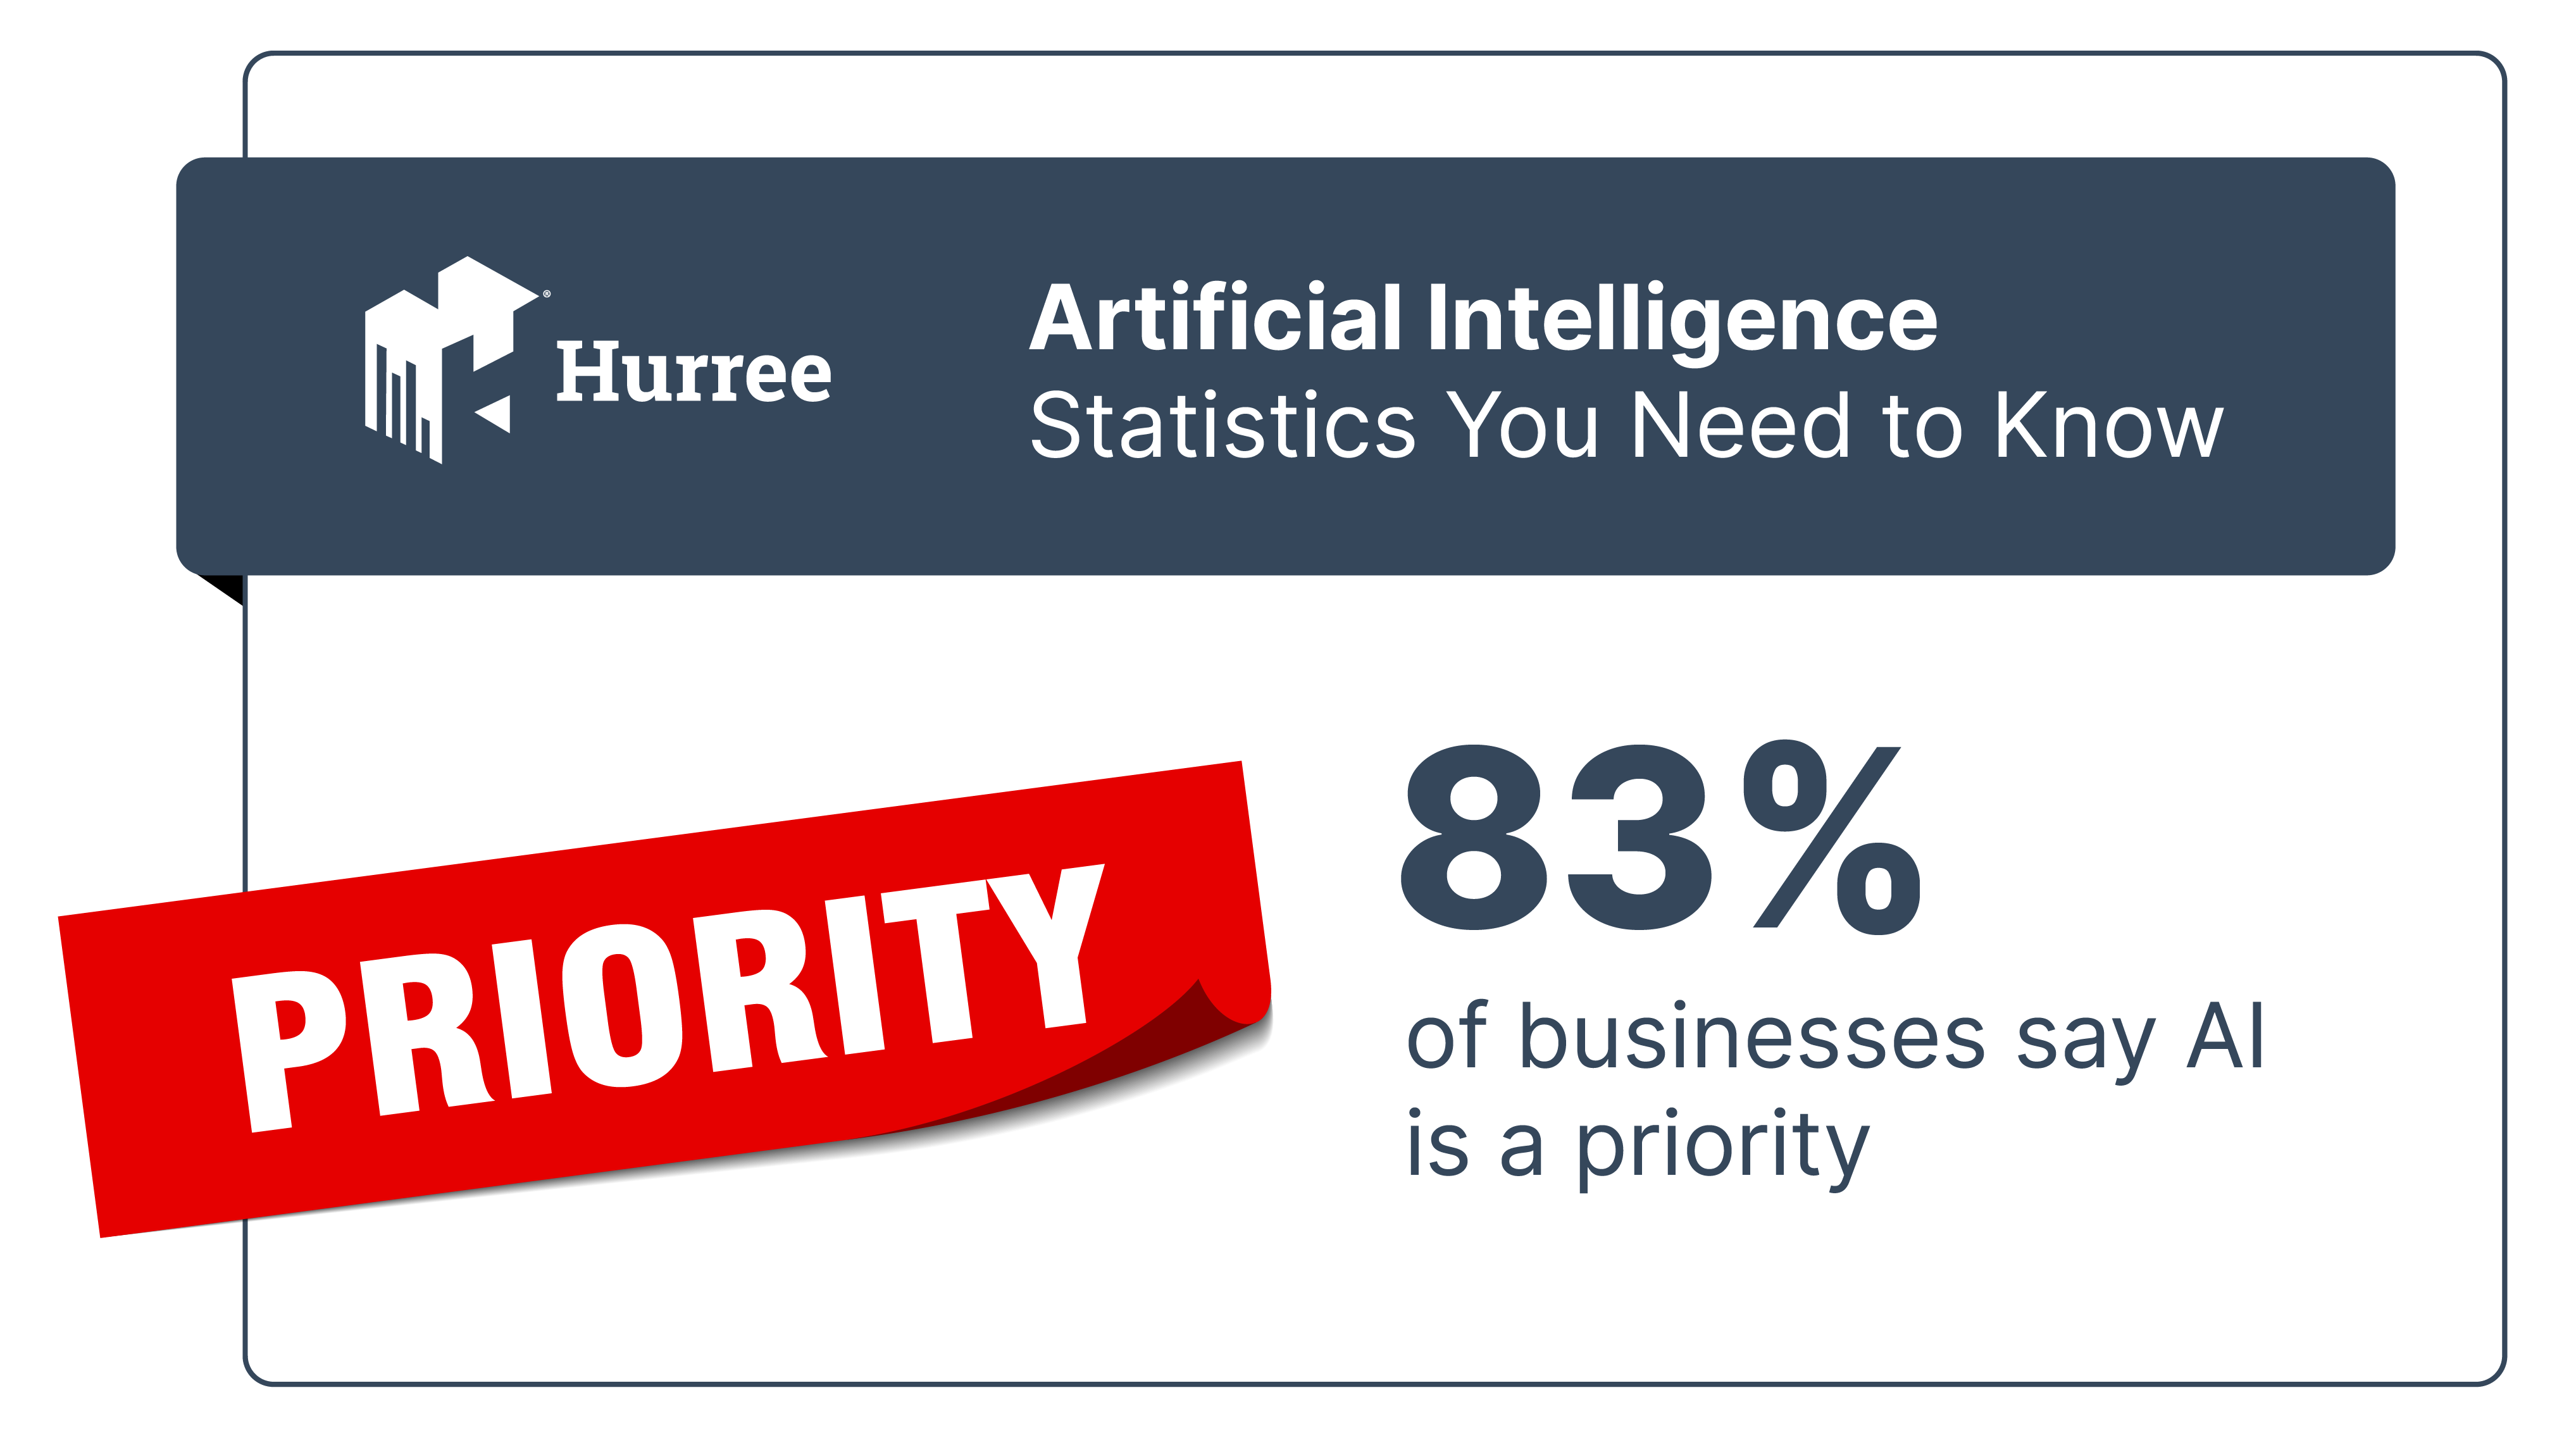 83% of businesses say AI is a priority